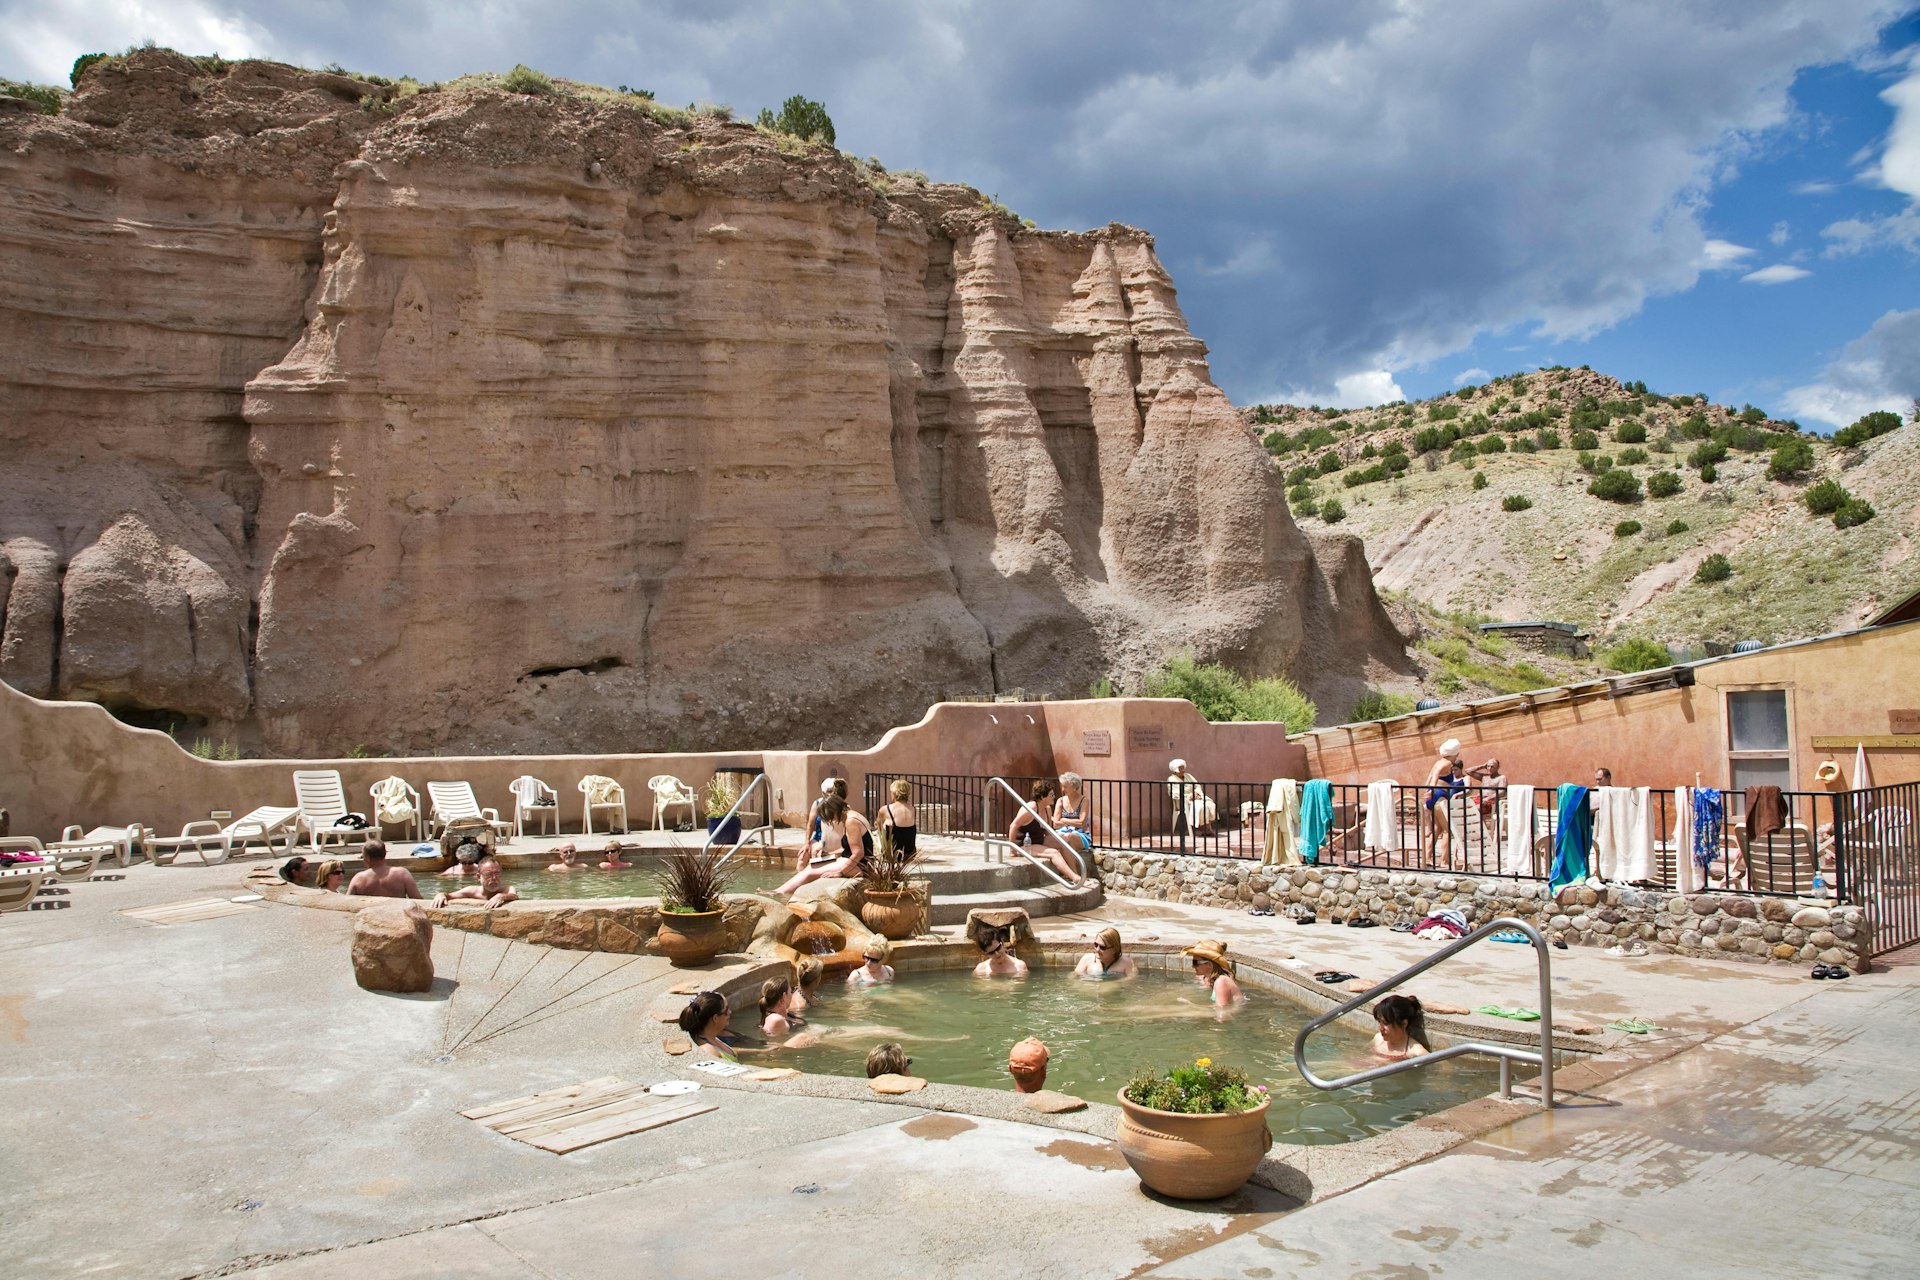 Mineral baths at the Ojo Caliente Mineral Springs Resort and Spa